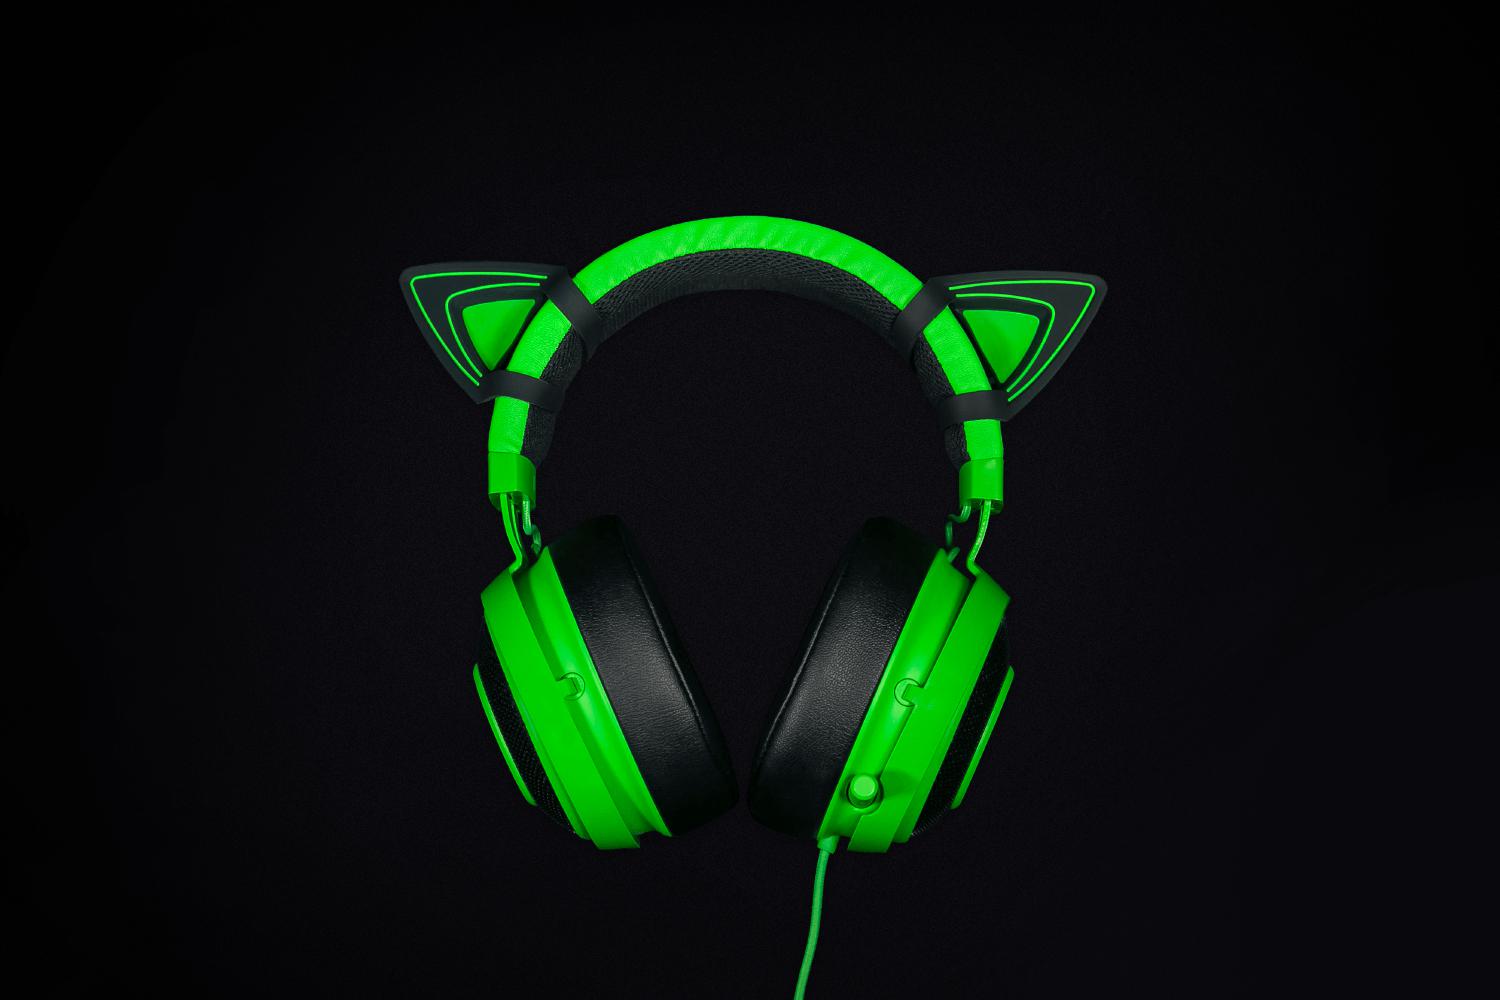 Kitty ears for Razer Kraken, Adjustable design for different looks, Sturdy and waterproof for worry-free use, green